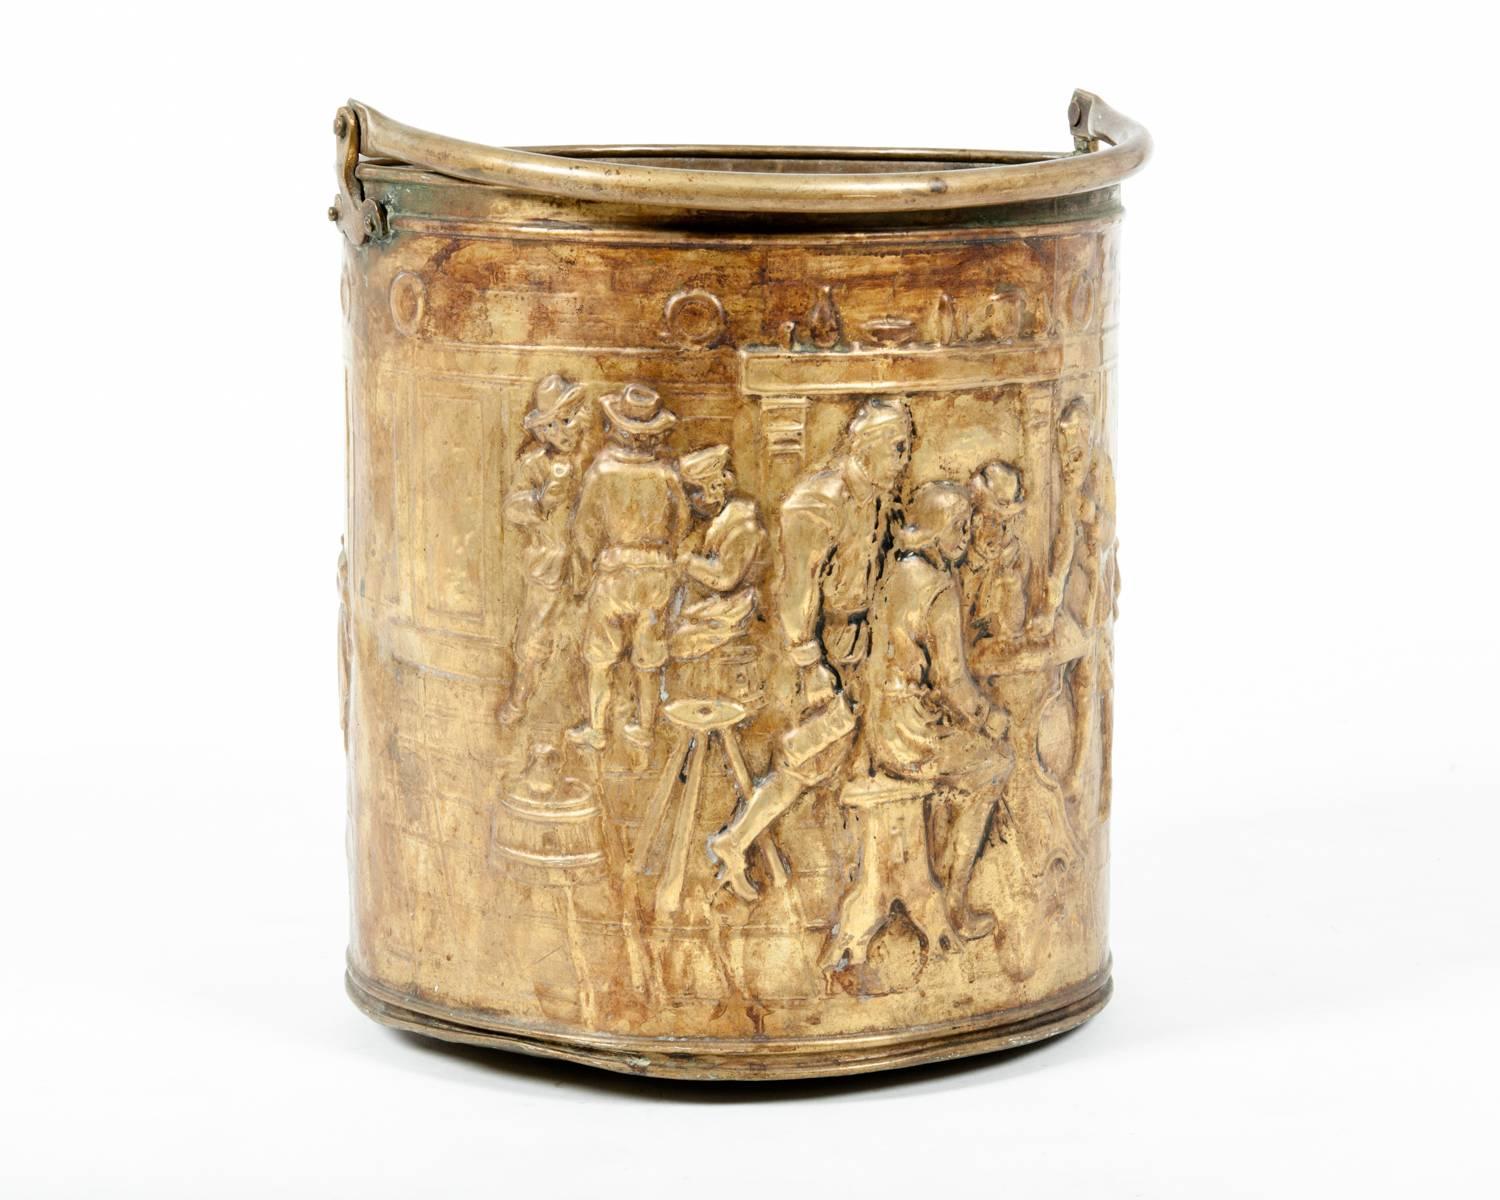 Antique English brass fire log or ash bucket, with heavily embossed scene. Brass handle.